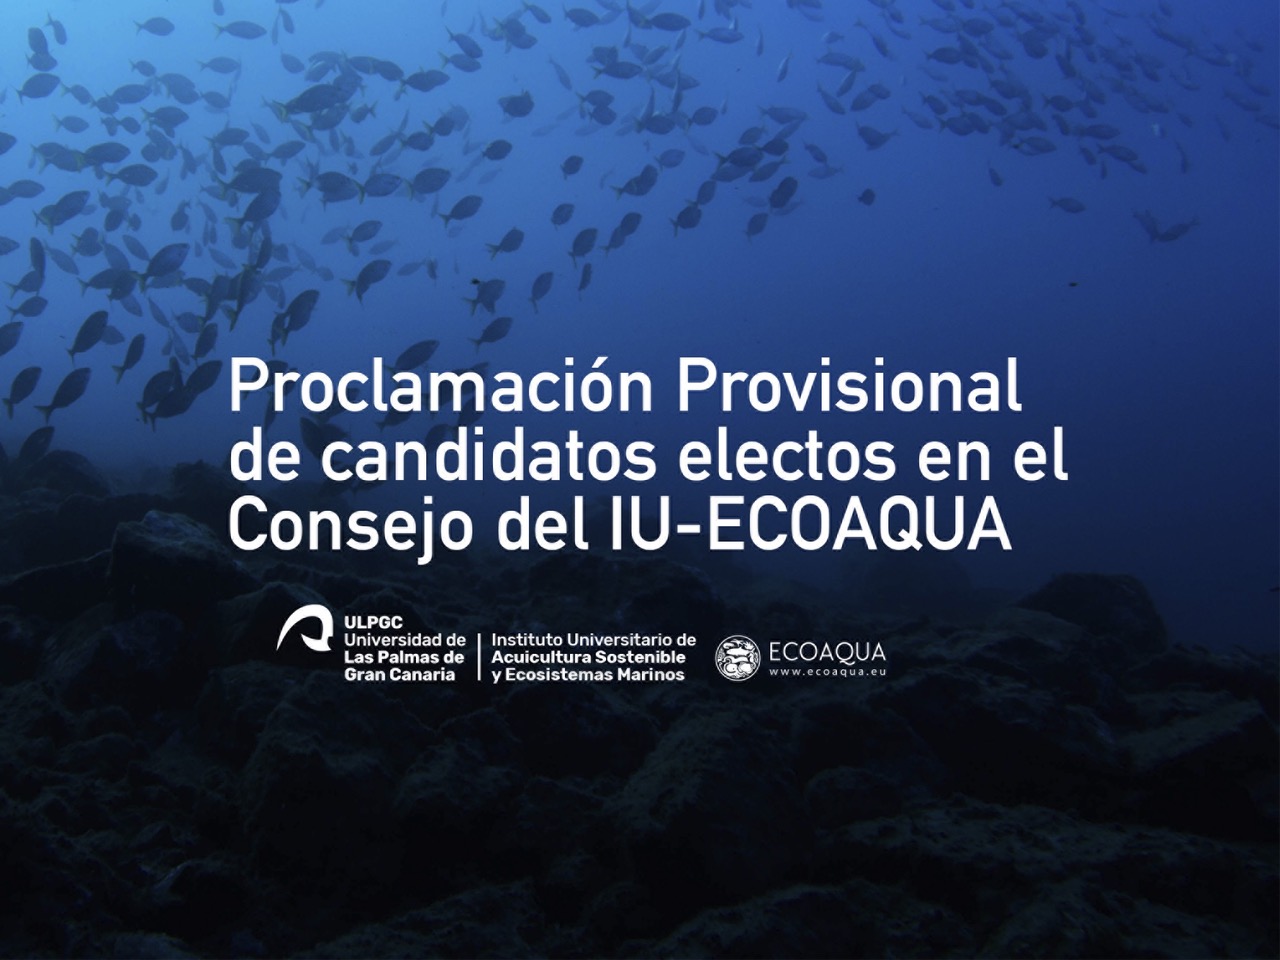 Provisional proclamation of the elected candidate for Director of the IU-ECOAQUA